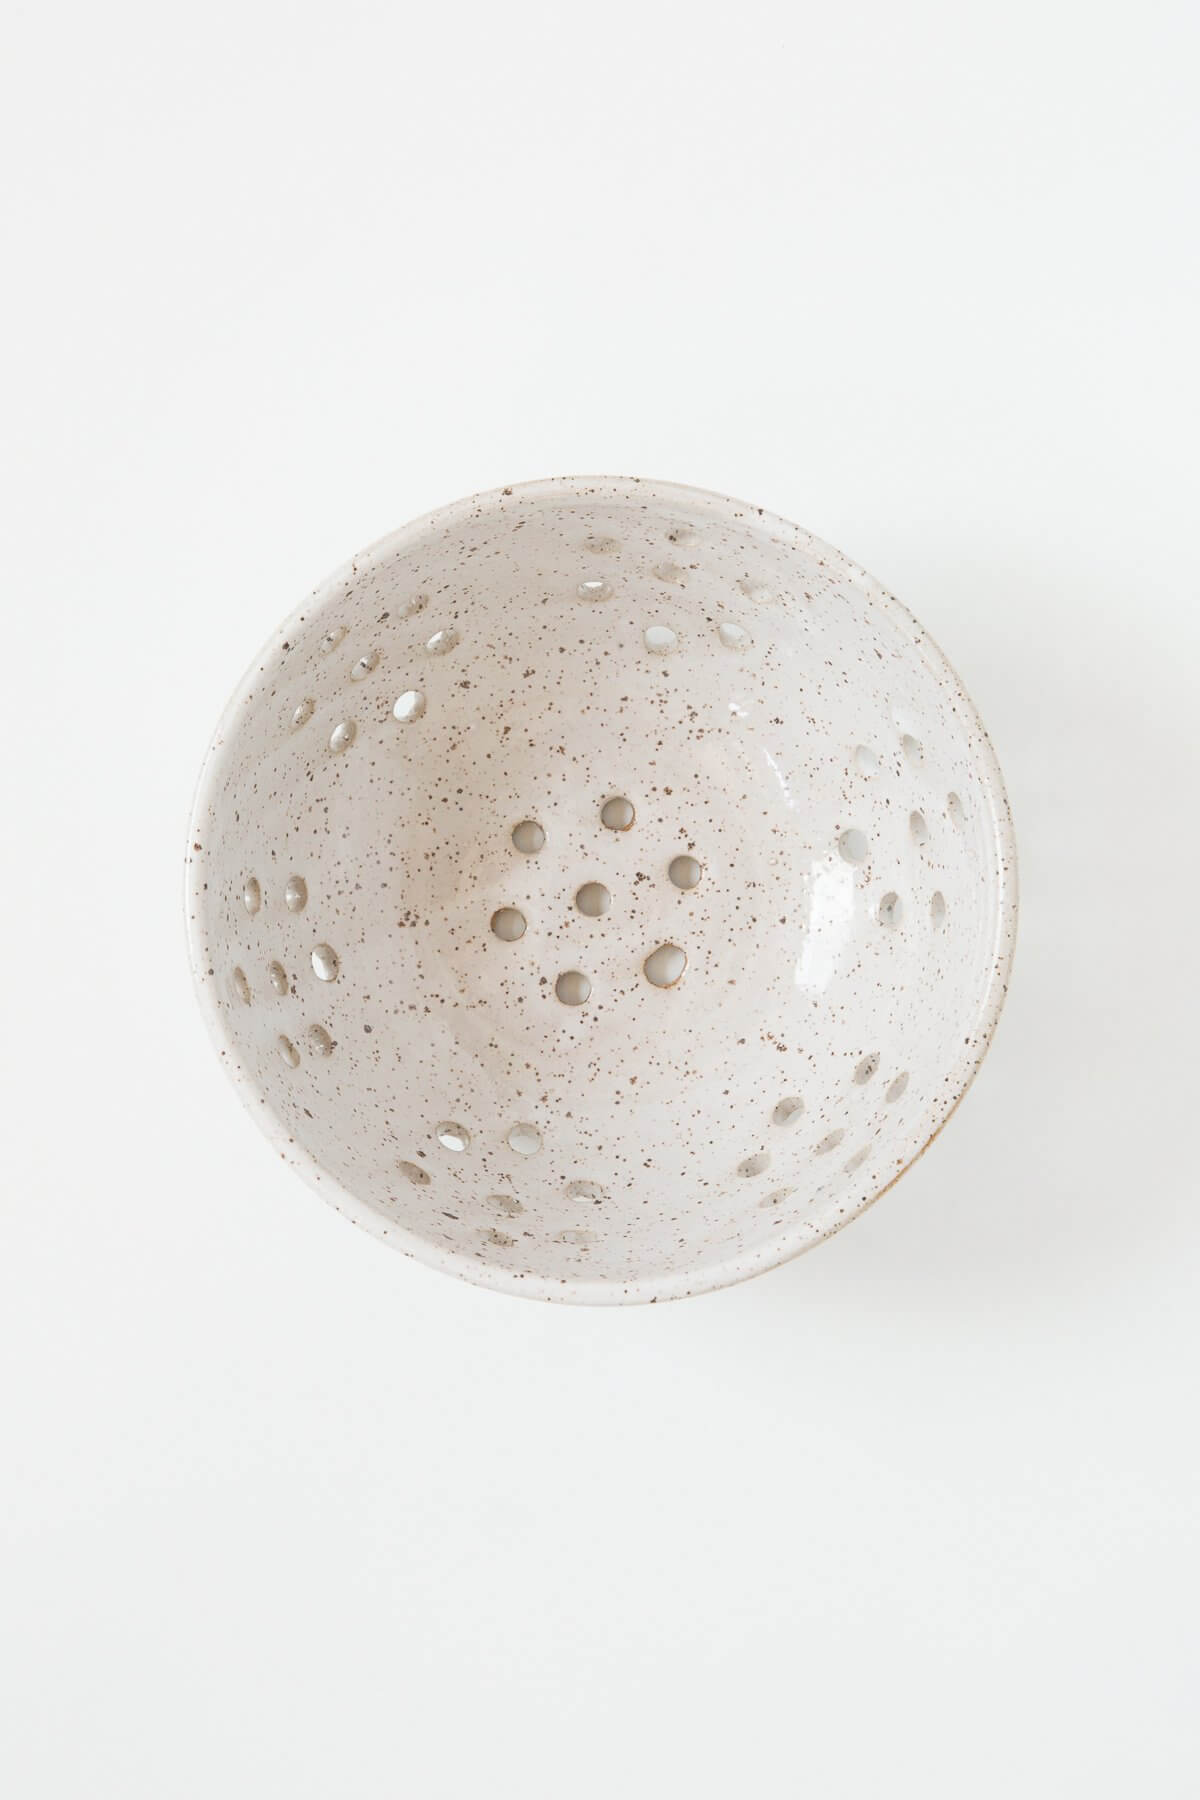 Rachael Pots Clay Berry Bowl in White